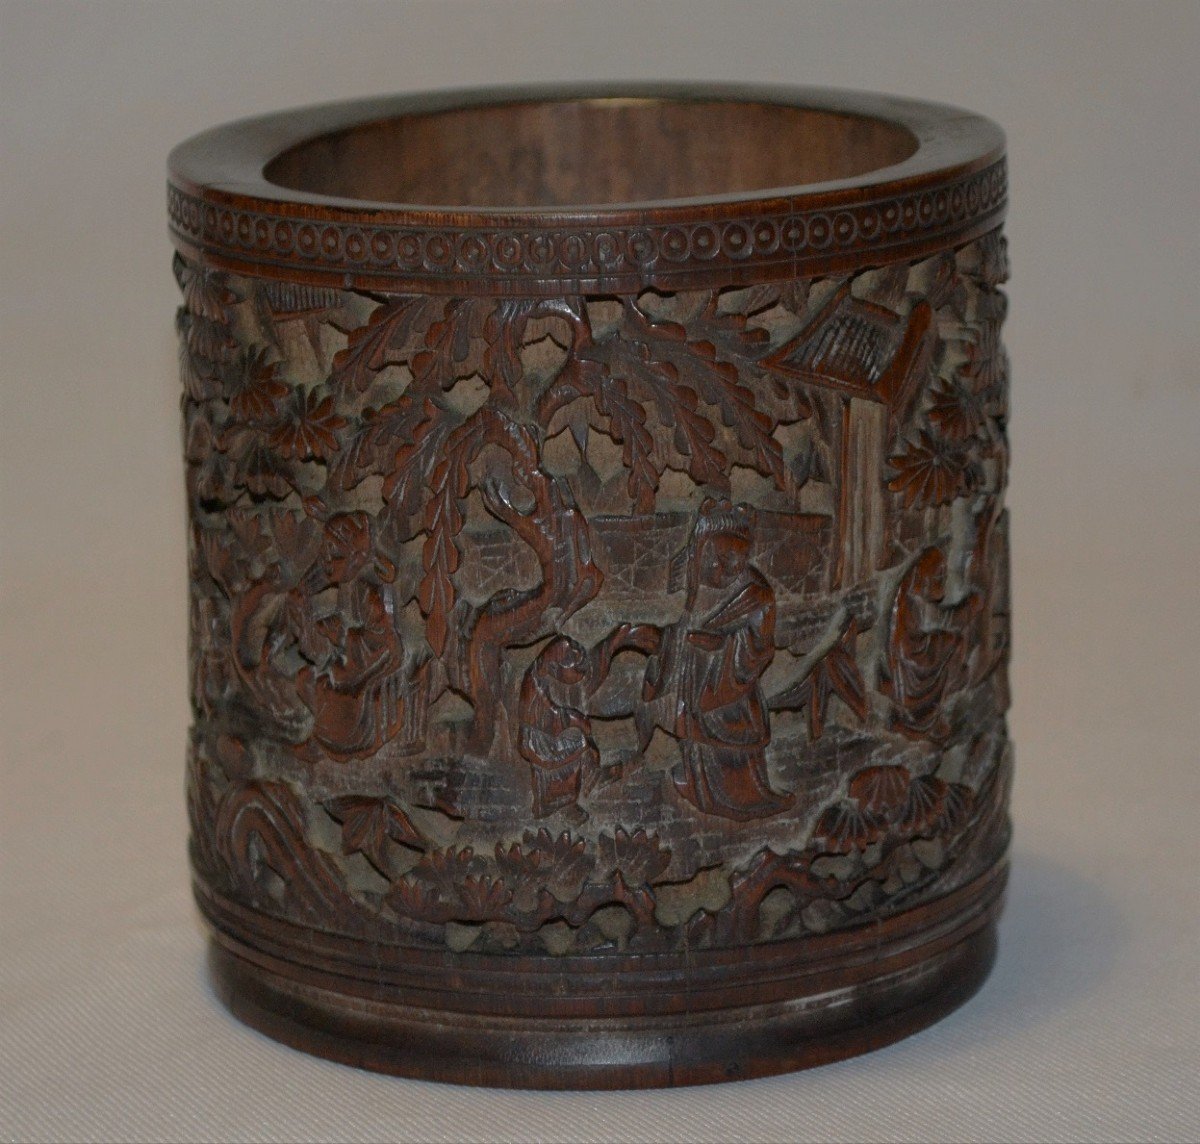 Shou-lao Carved Bamboo Pot. Chinese Work From The 19th Century Or Before. Qing Or Ming Dynasty